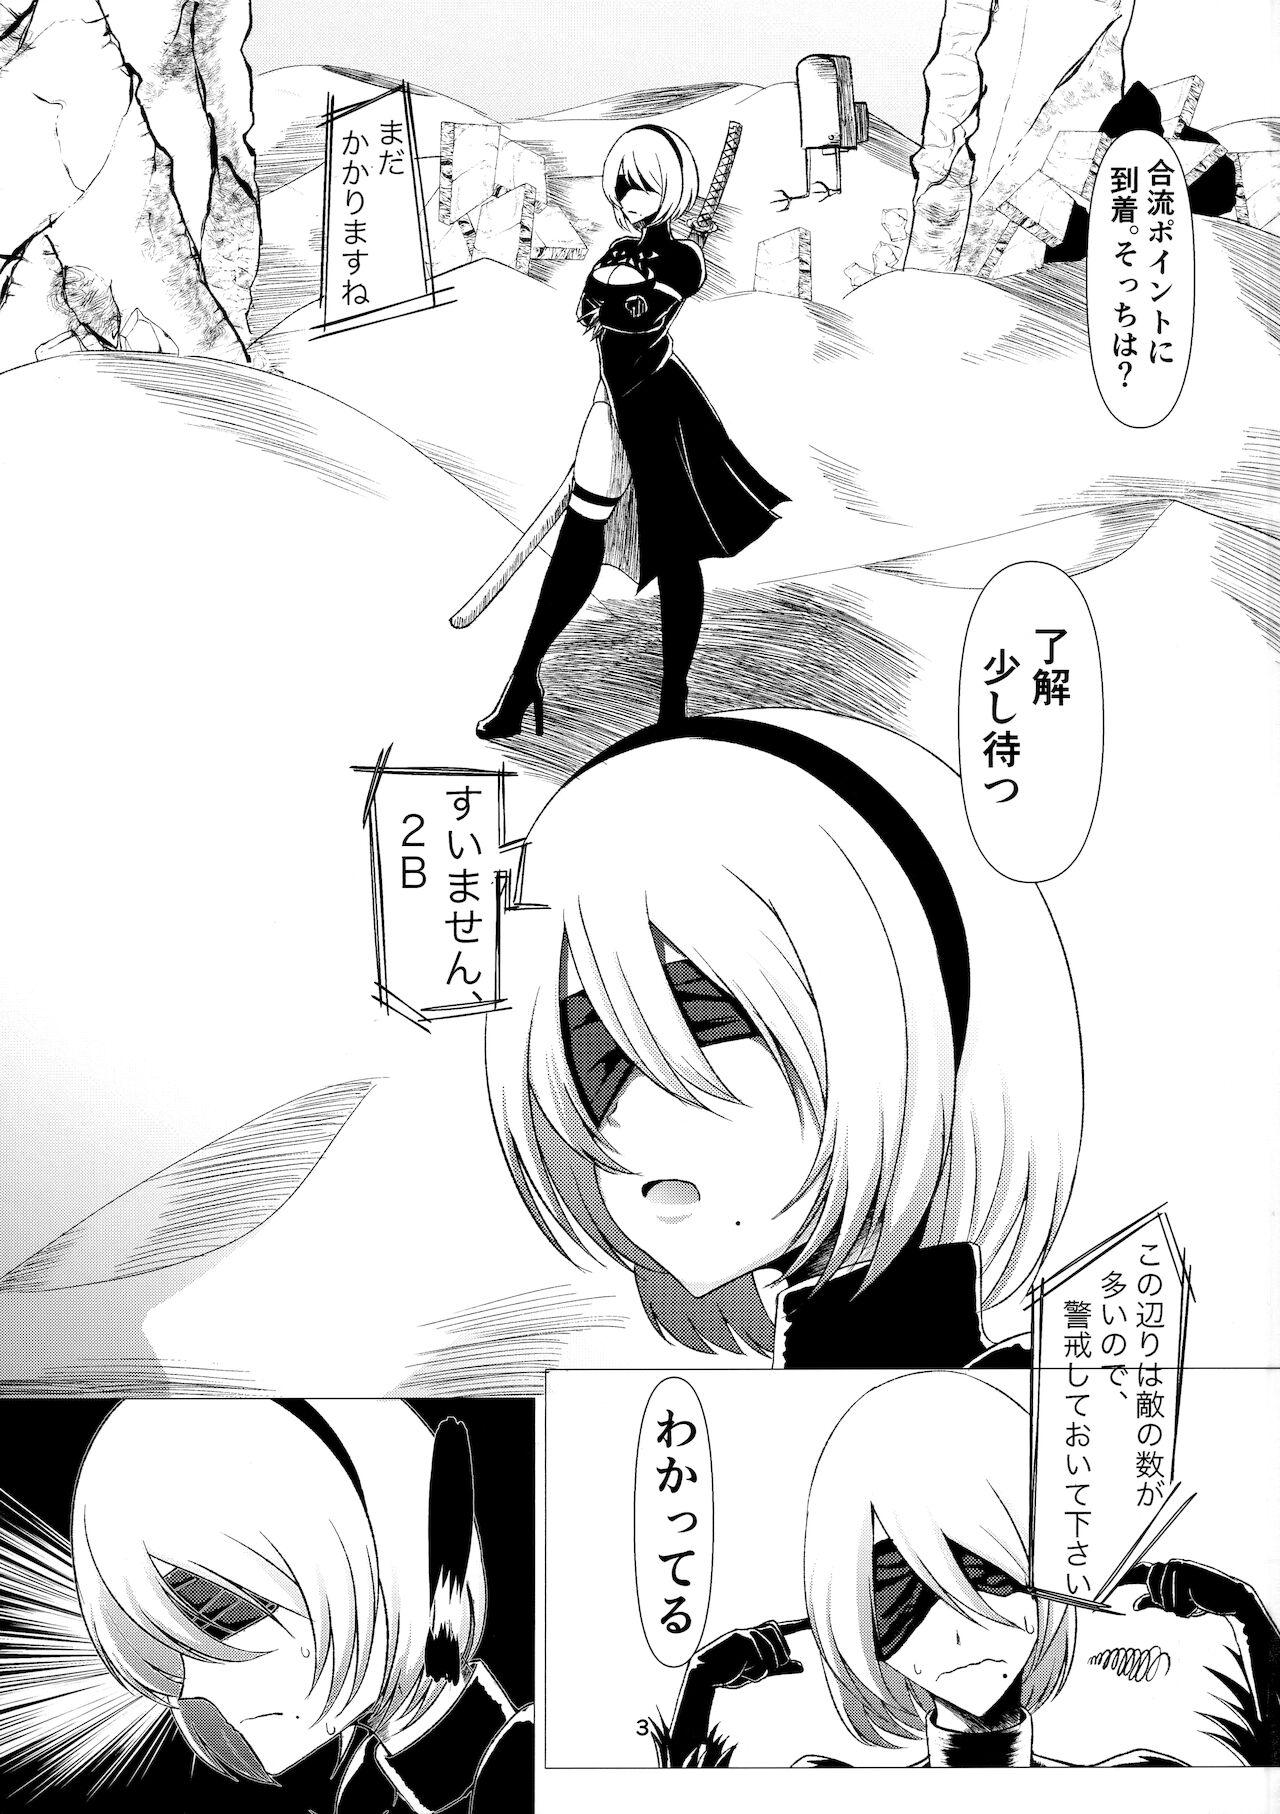 Mulata E690BEE4B9B3E88289E5A5B4E99AB7 2B - Nier automata Polish - Page 2